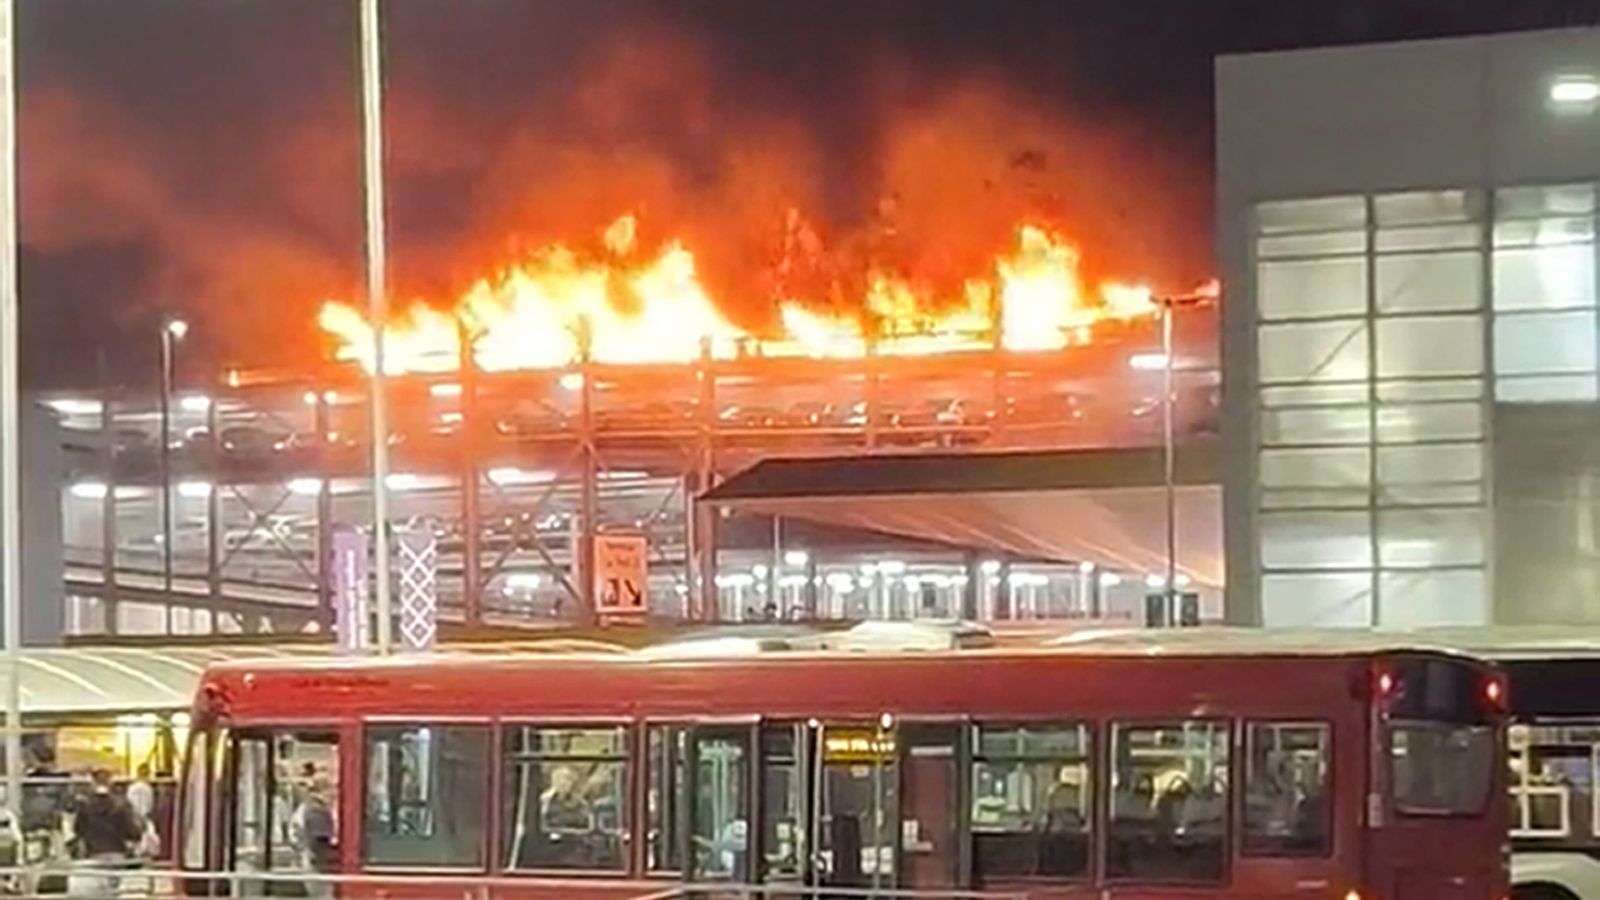 Luton Airport fire: All flights suspended after massive blaze causes terminal car park to partially collapse